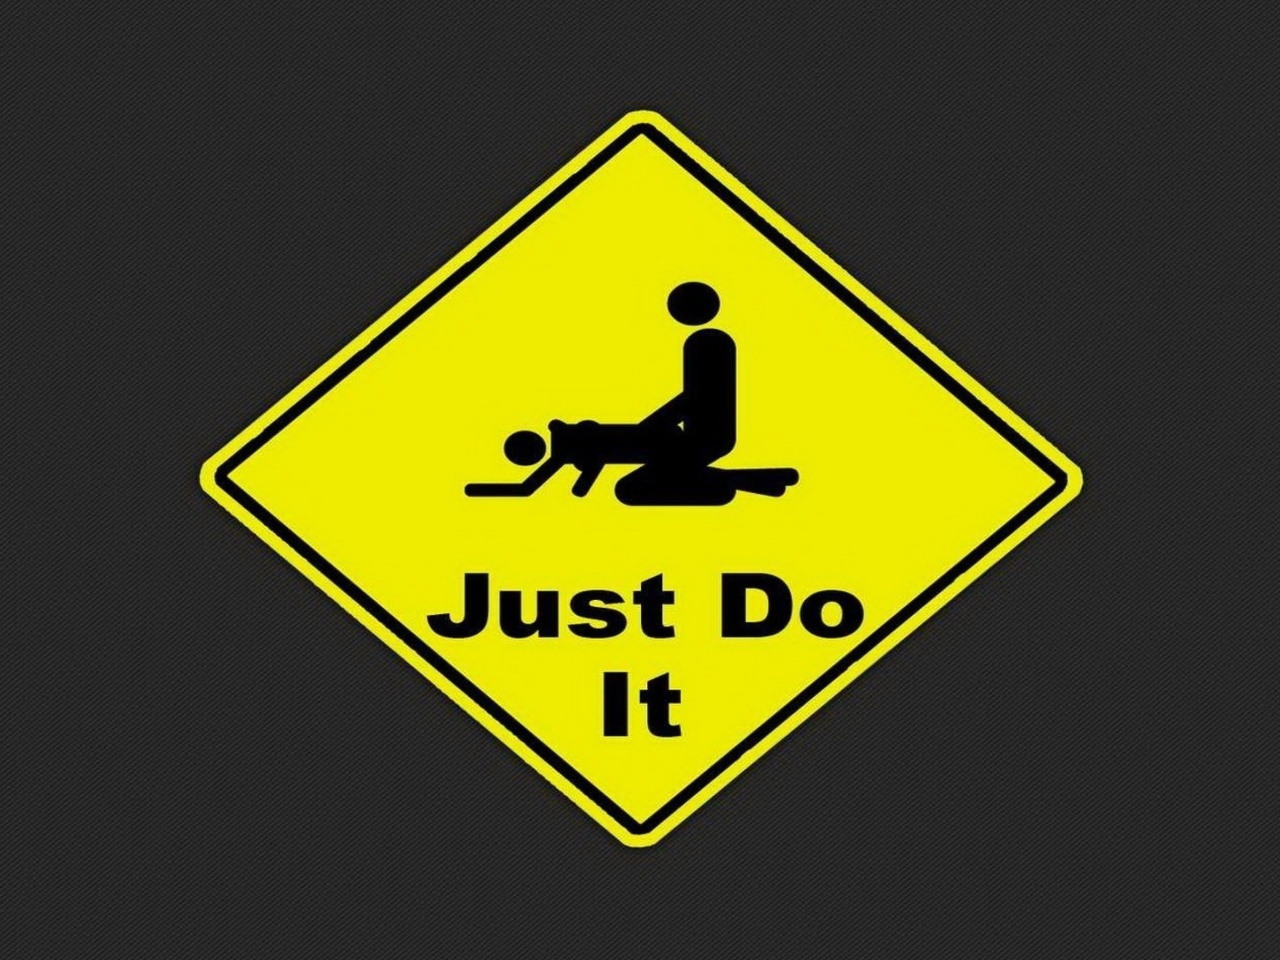 Das Just Do It Funny Sign Wallpaper 1280x960